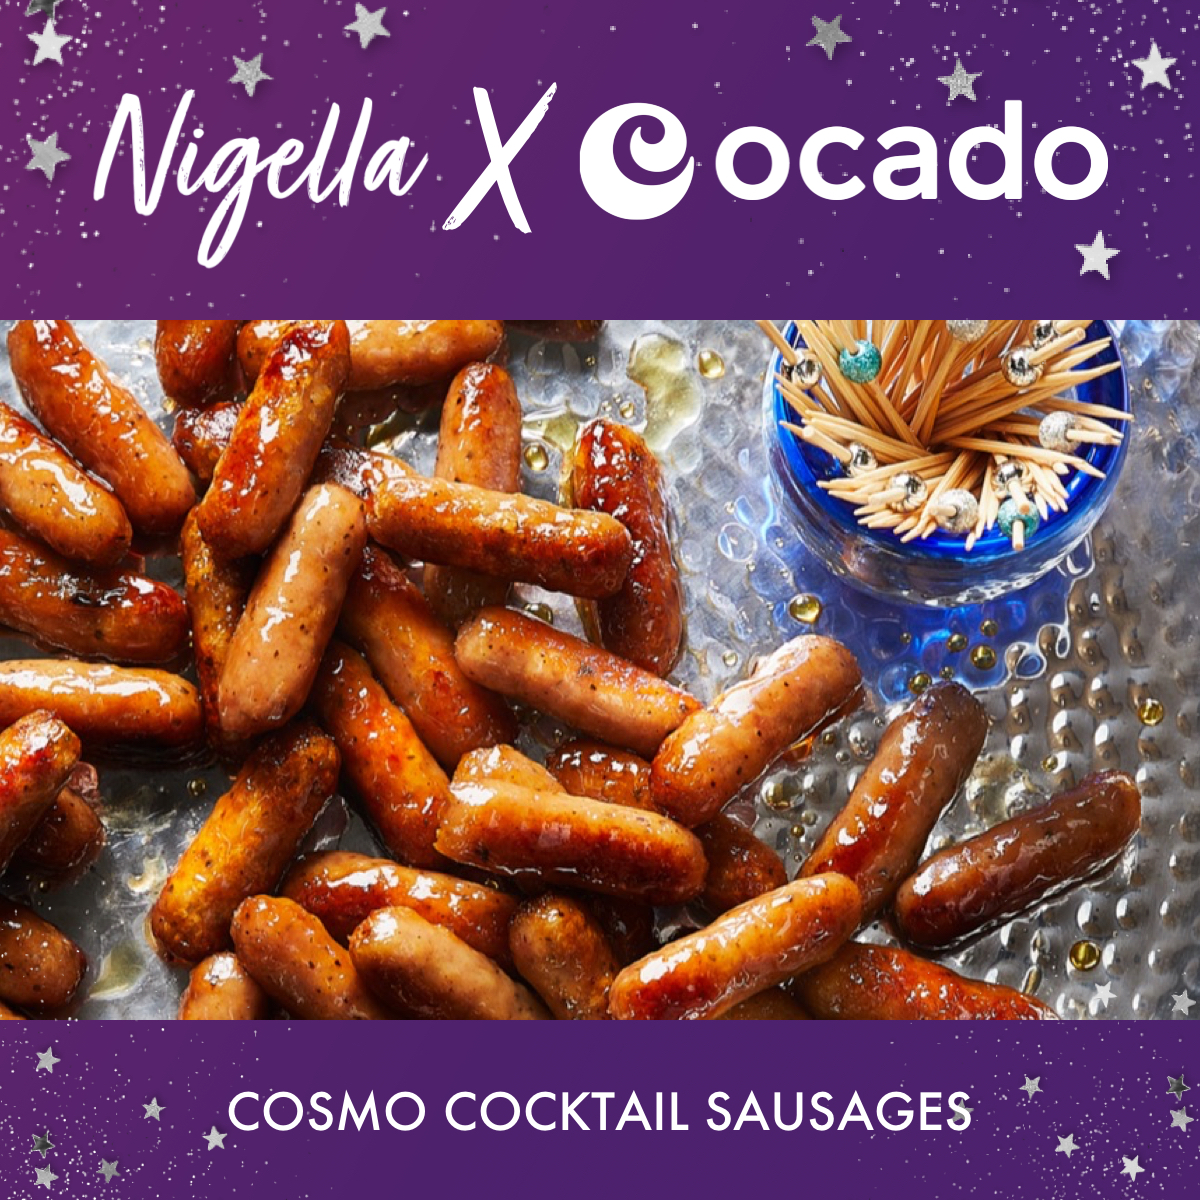 Cosmo Cocktail Sausages